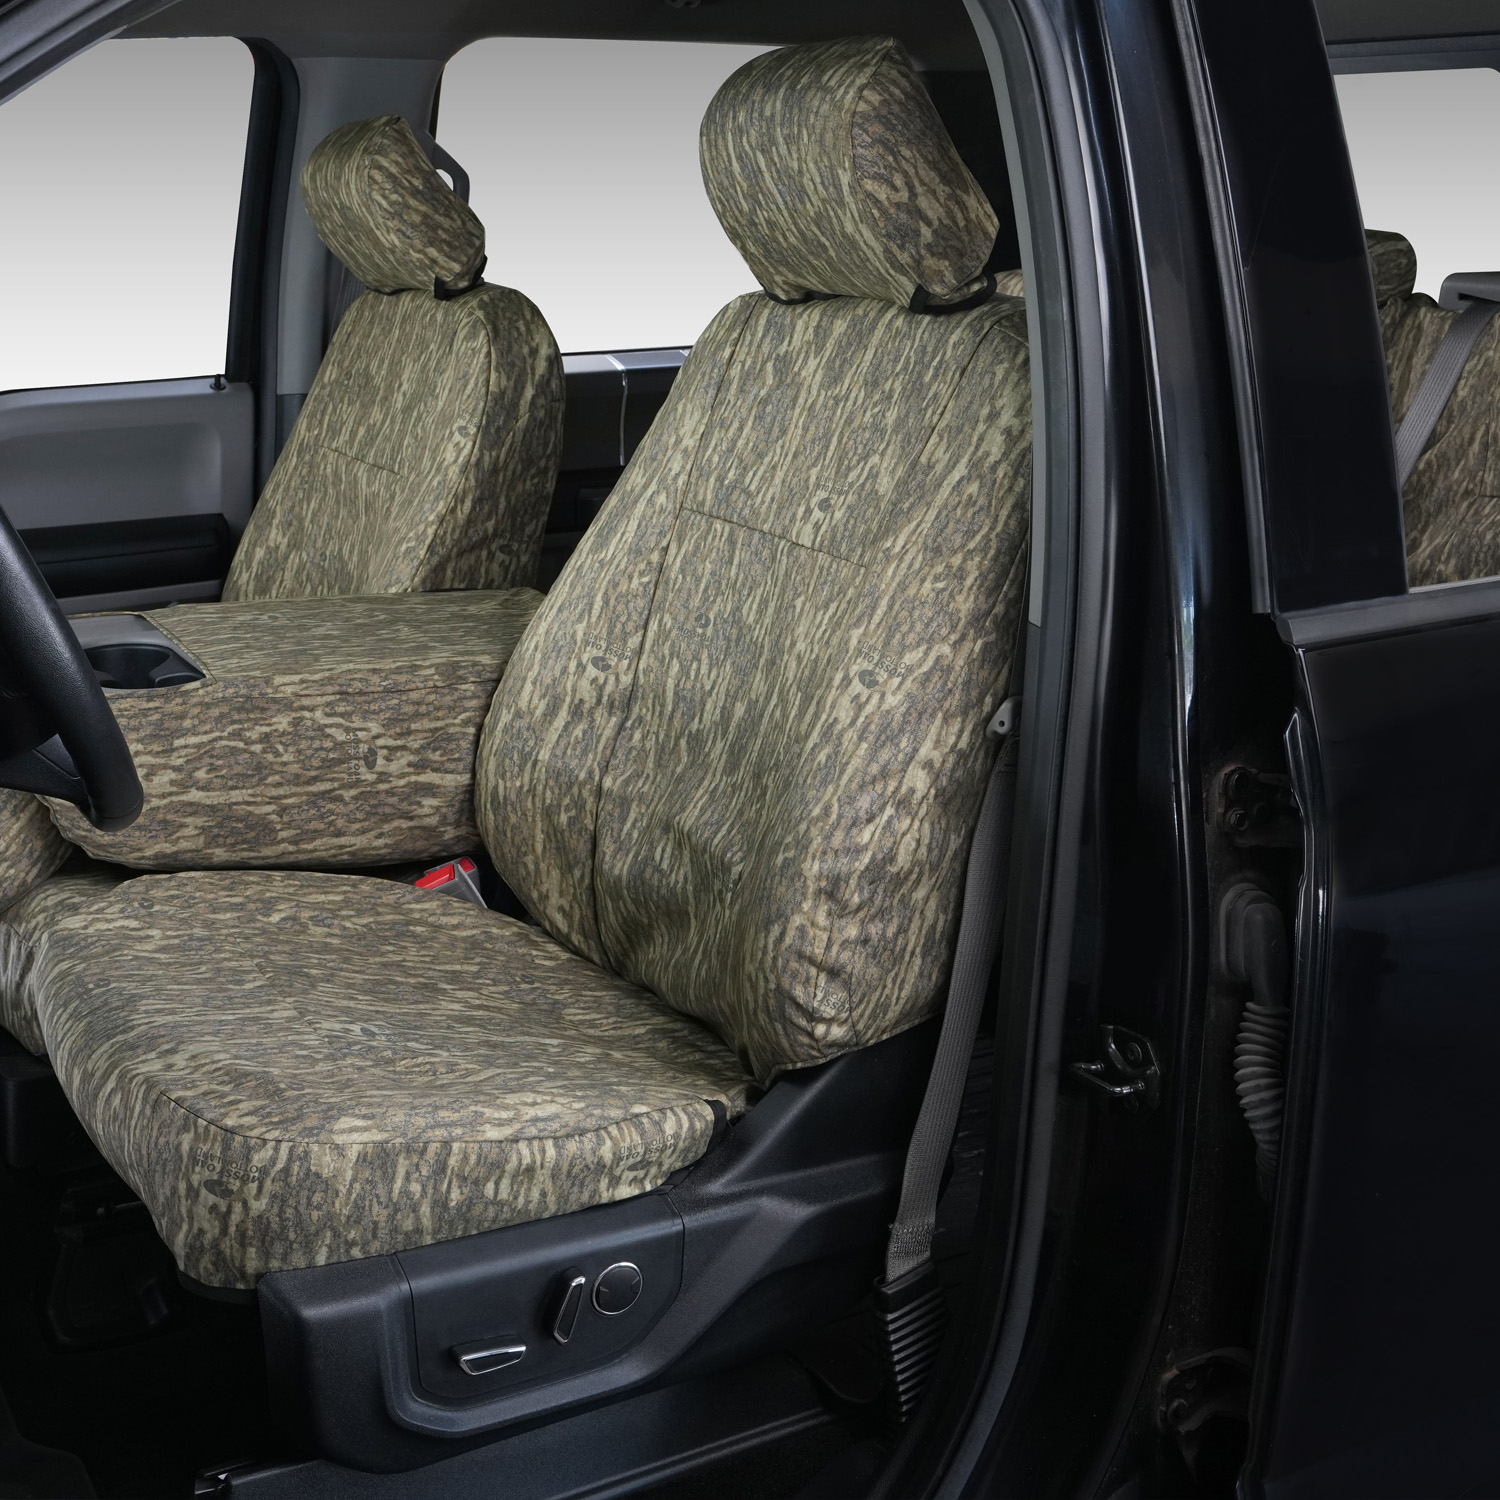 Covercraft Marathon Excel Mossy Oak camo truck seat covers are designed for those with an active lifestyle. From camping, to hunting, to work trucks these waterproof camouflage seat covers are made from our toughest material and specially engineered for a snug fit. Our unique woodland camo seat covers are inspired by nature and natural concealment patterns.